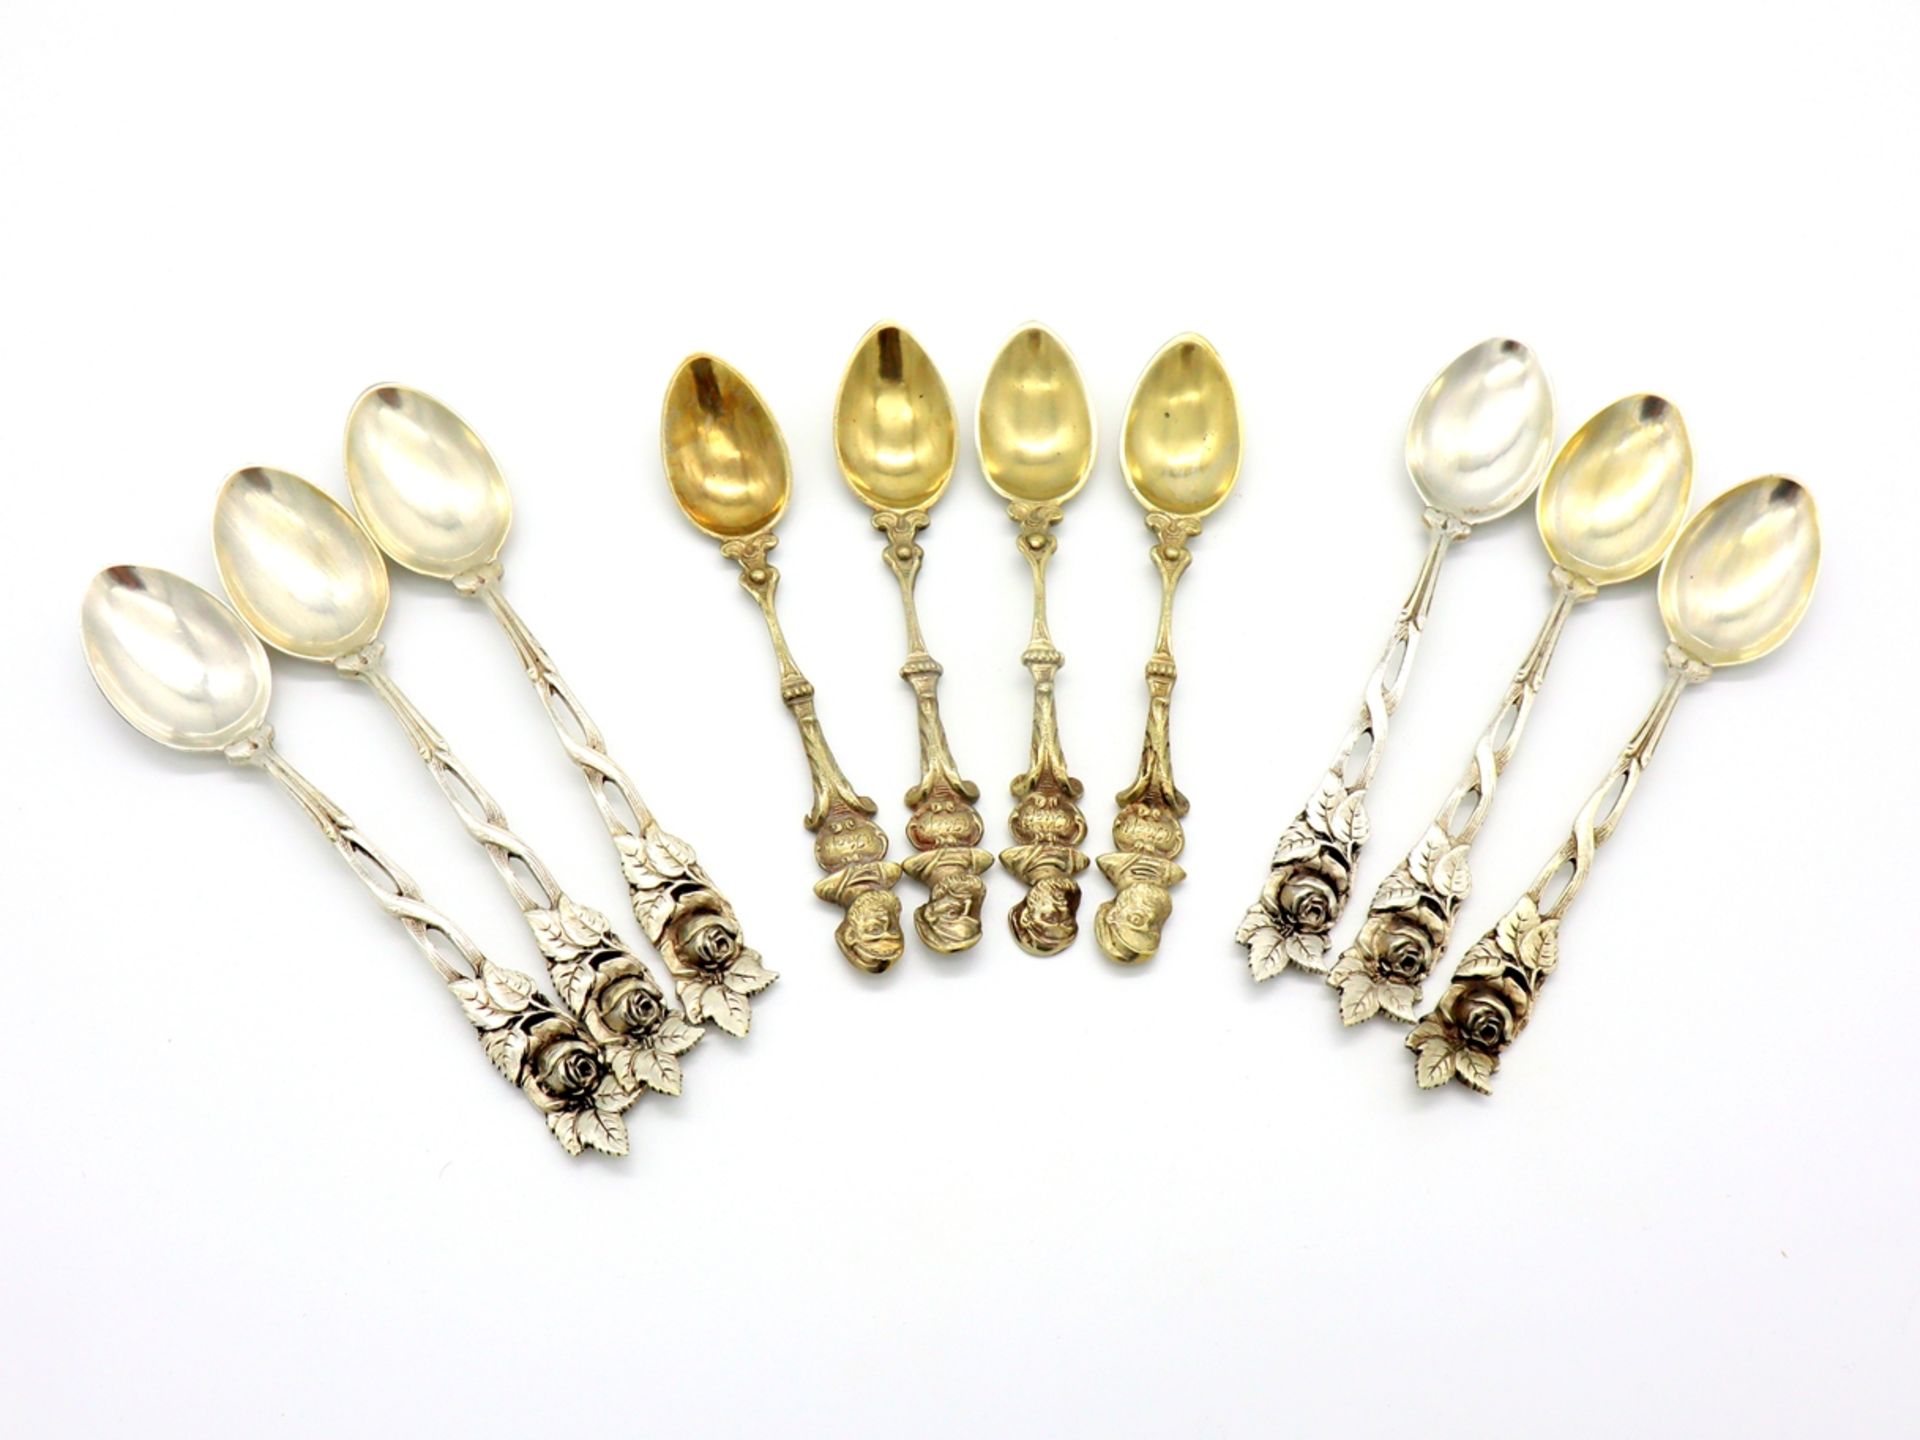 6 dessert spoons Hanauer Rose, 800 silver & 4 dessert spoons silver plated in case. - Image 3 of 8